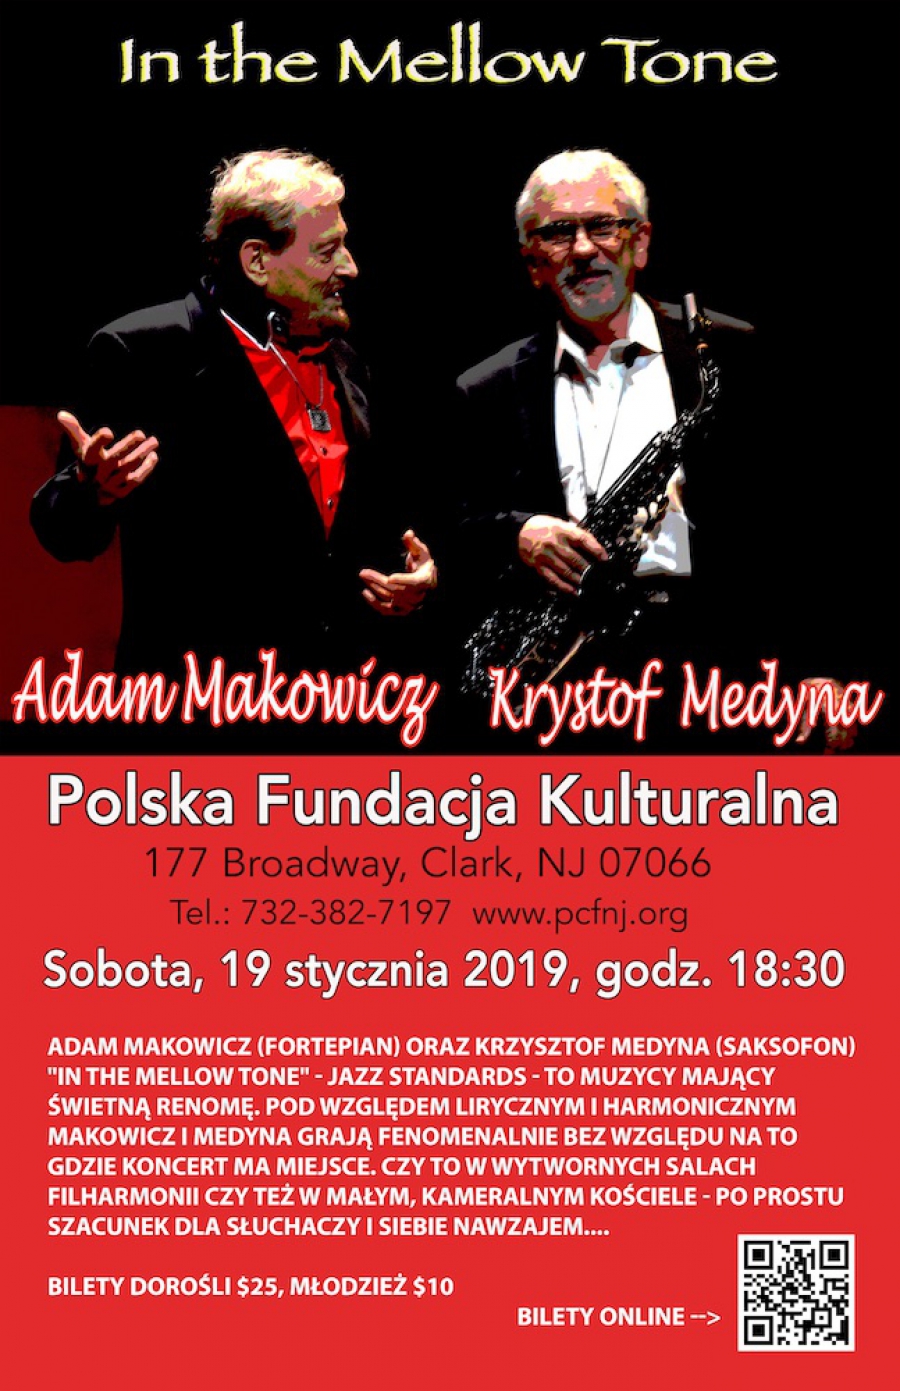 Makowicz, Medyna "In the Mellow Tone" - concert